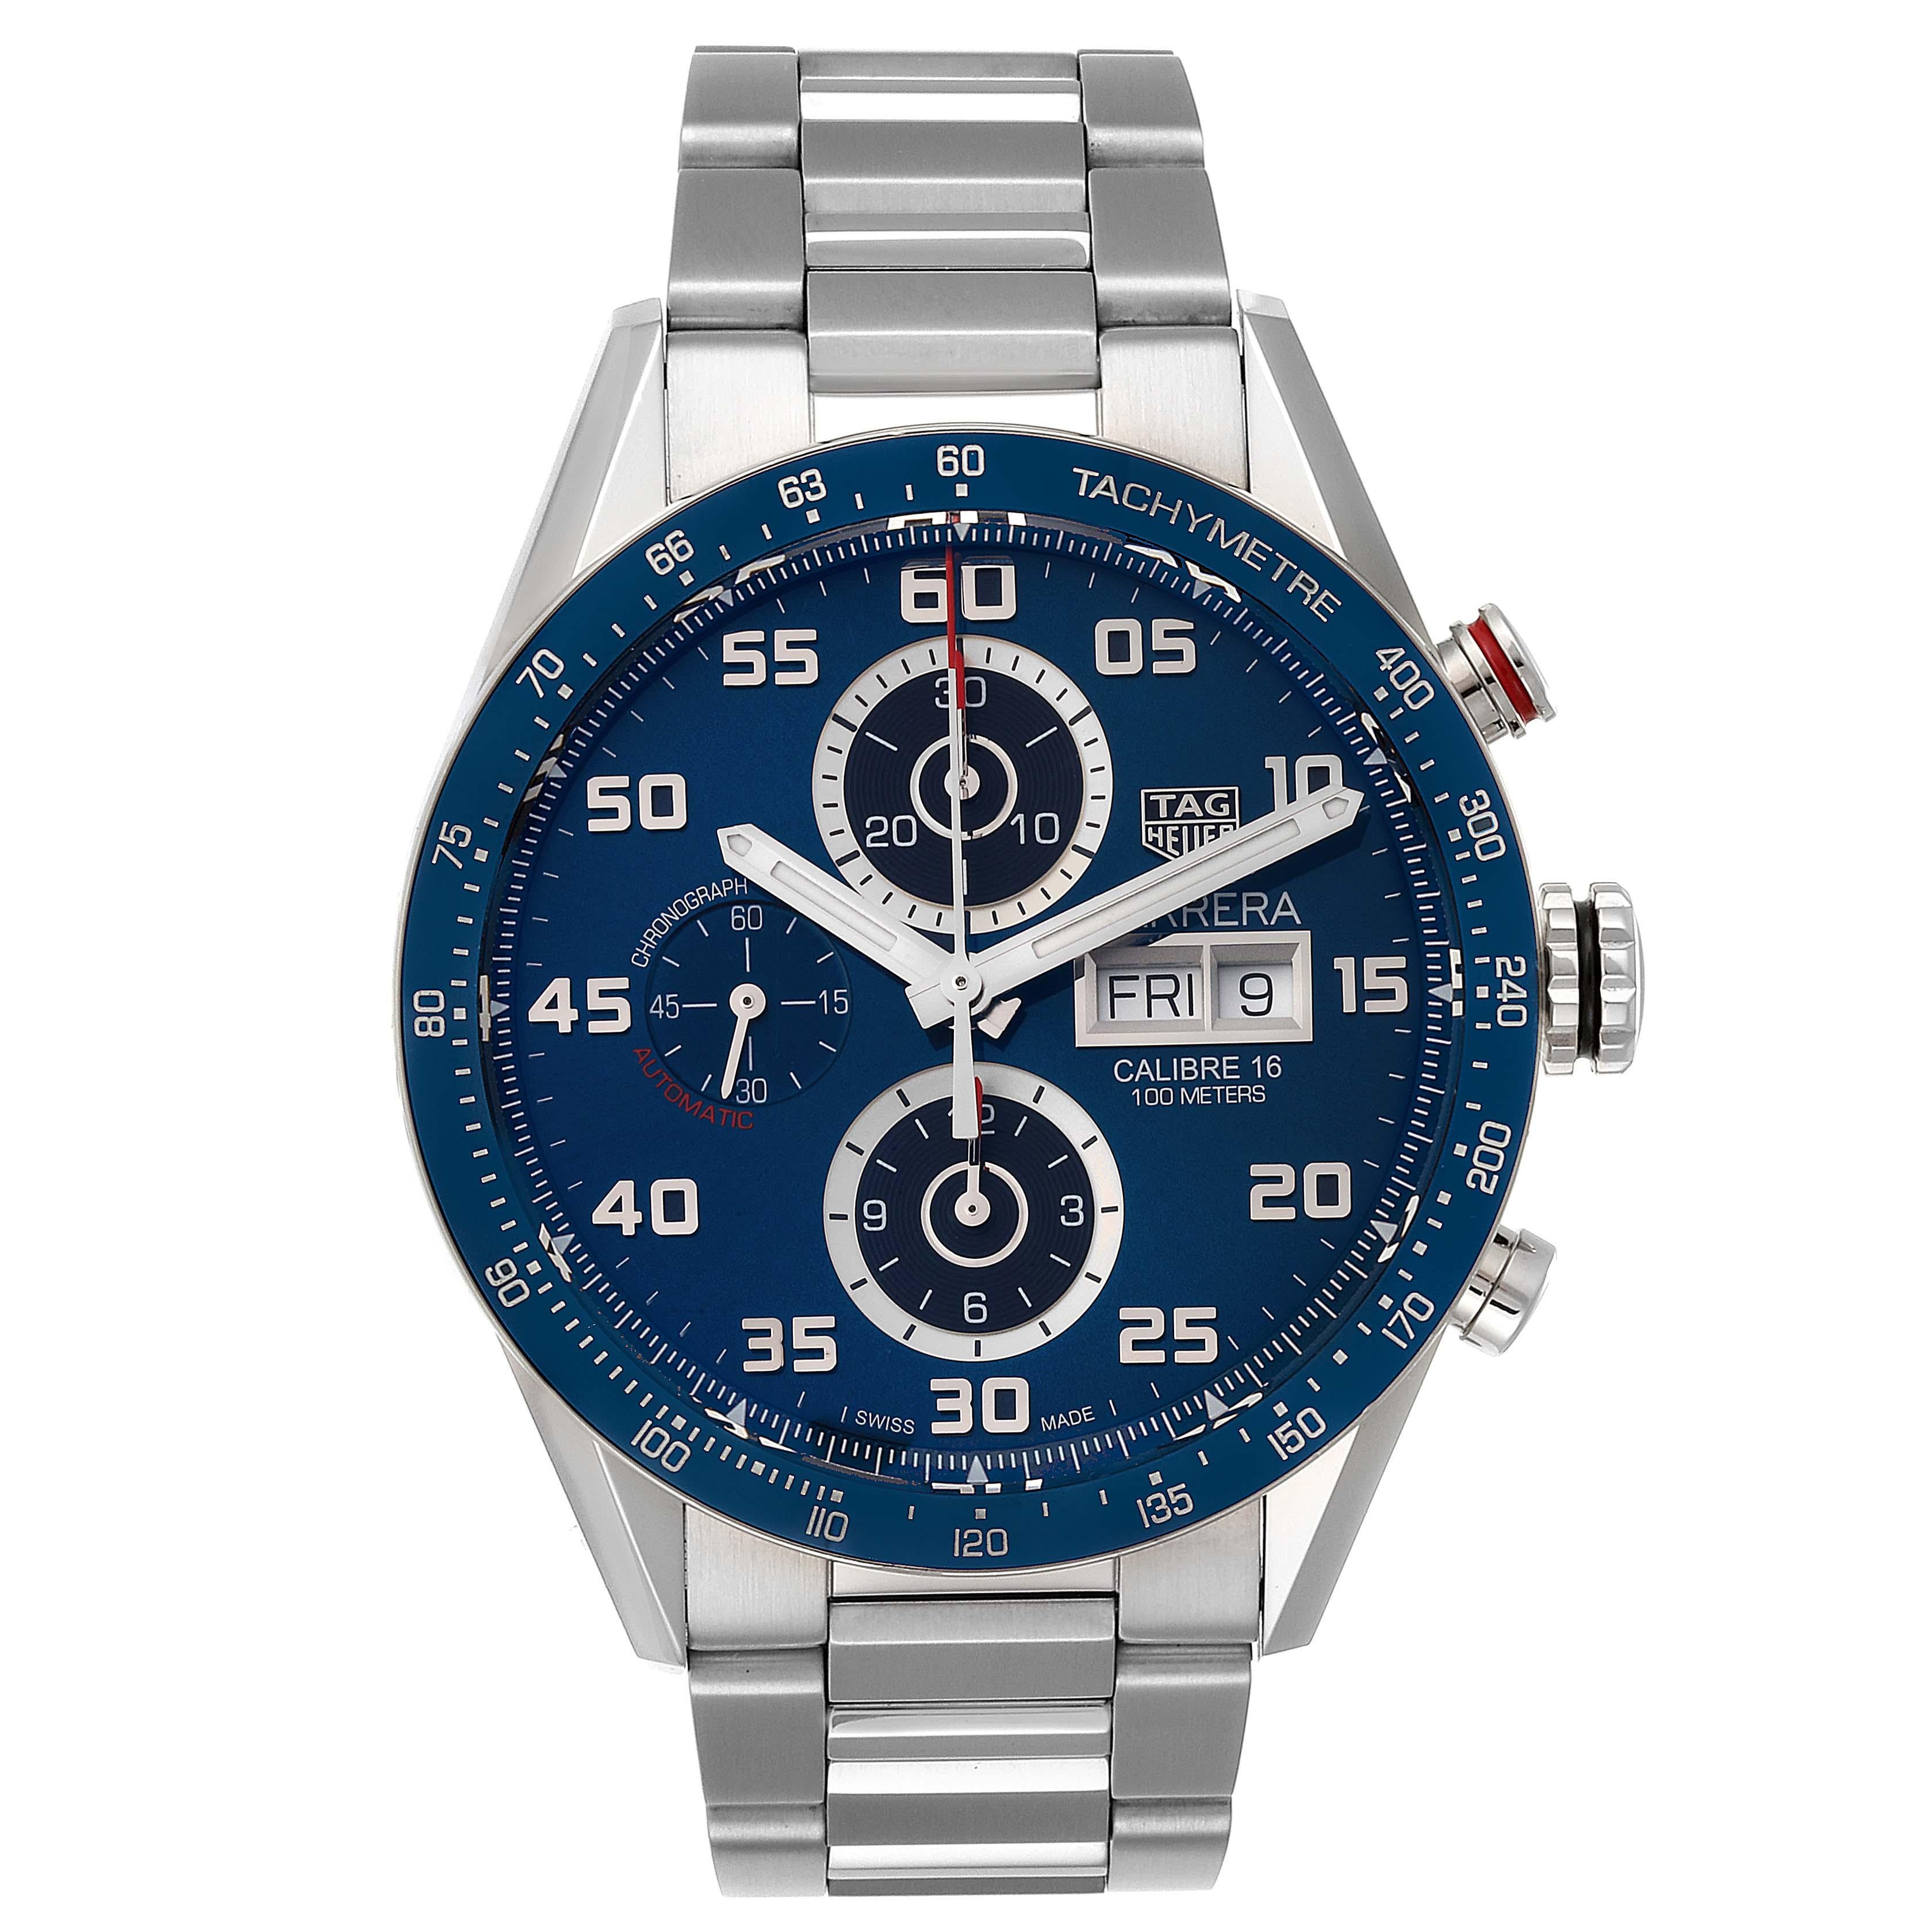 Tag Heuer Carrera Blue Dial Chronograph Steel Mens Watch CV2A1V. Automatic self-winding chronograph movement. Steel case 43.0 mm. Transperent sapphire crystal case back. Case thickness: 16.85 mm. Blue ceramic bezel with tachymeter scale. Scratch